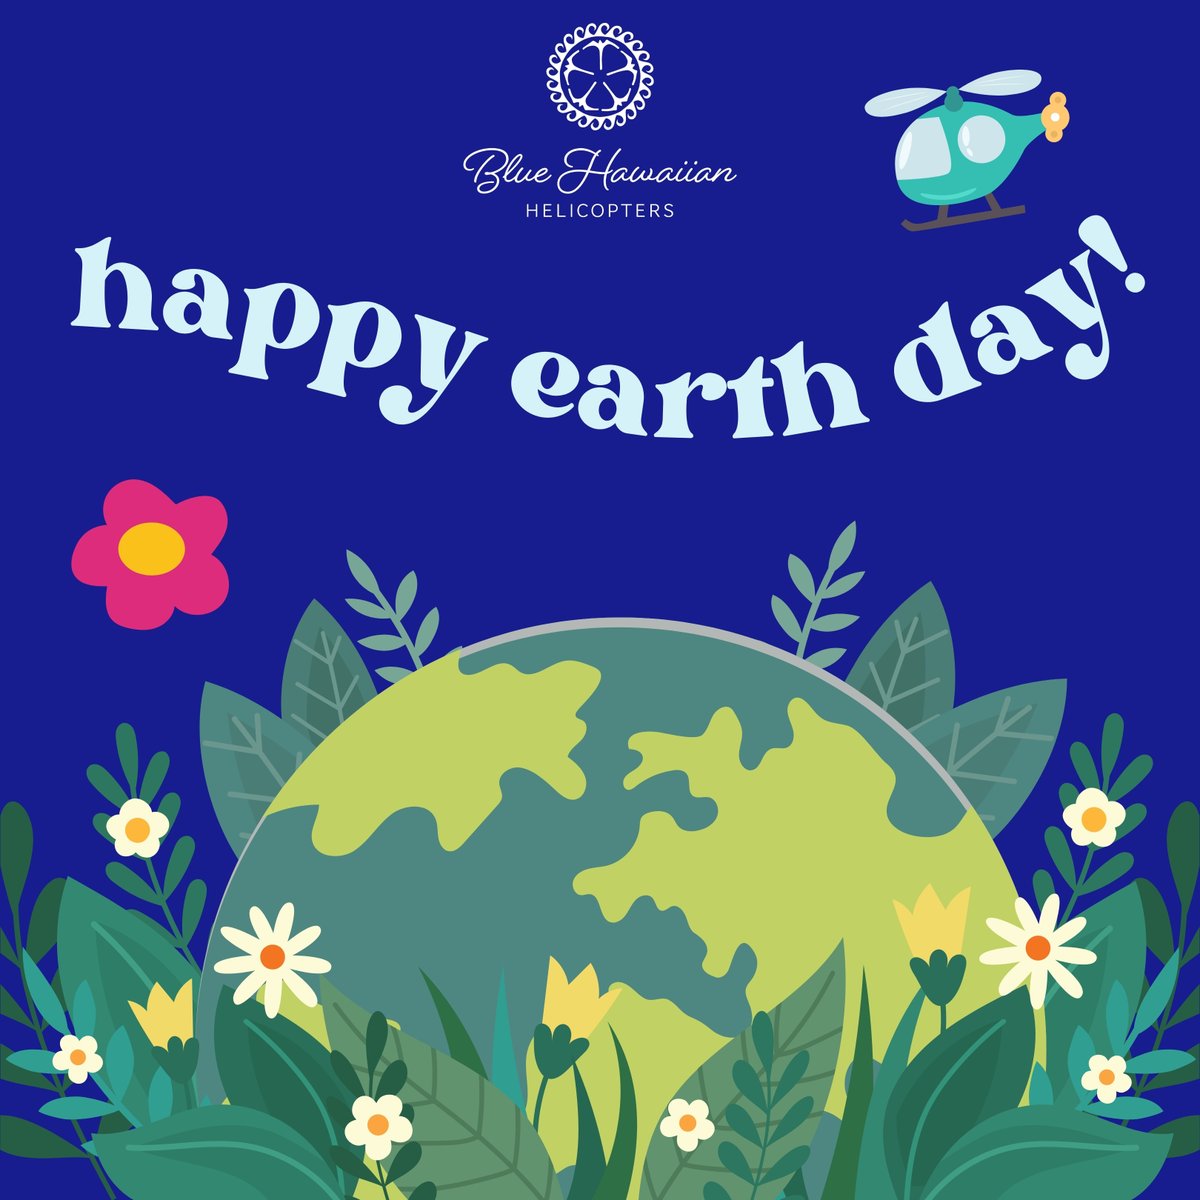 Happy Earth Day from Blue Hawaiian Helicopters! What a breathtaking planet it is, and we are grateful for the opportunity to share Earth's beauty from above.